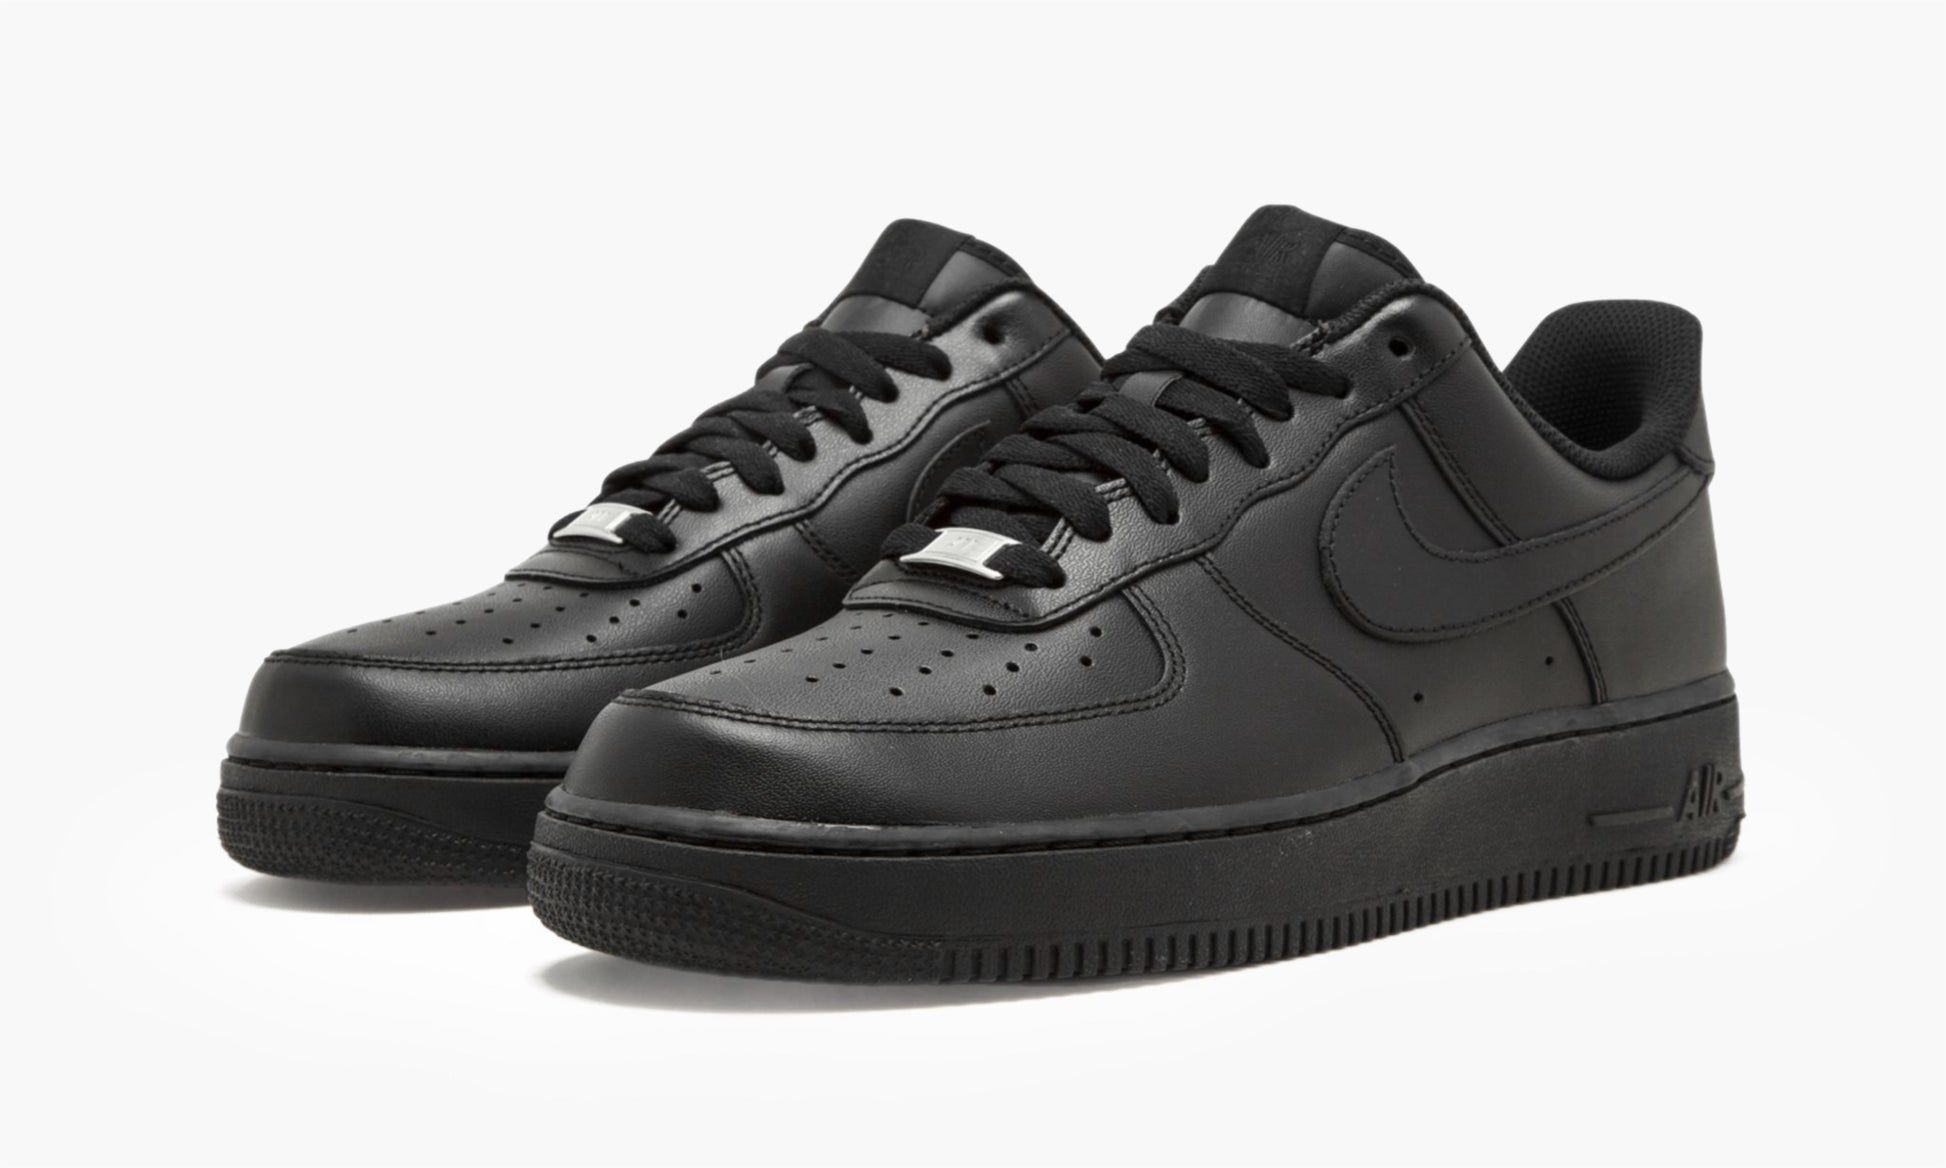 Air Force 1'07 Low Black- 315122 001/ CW2288 001 | The Sortage